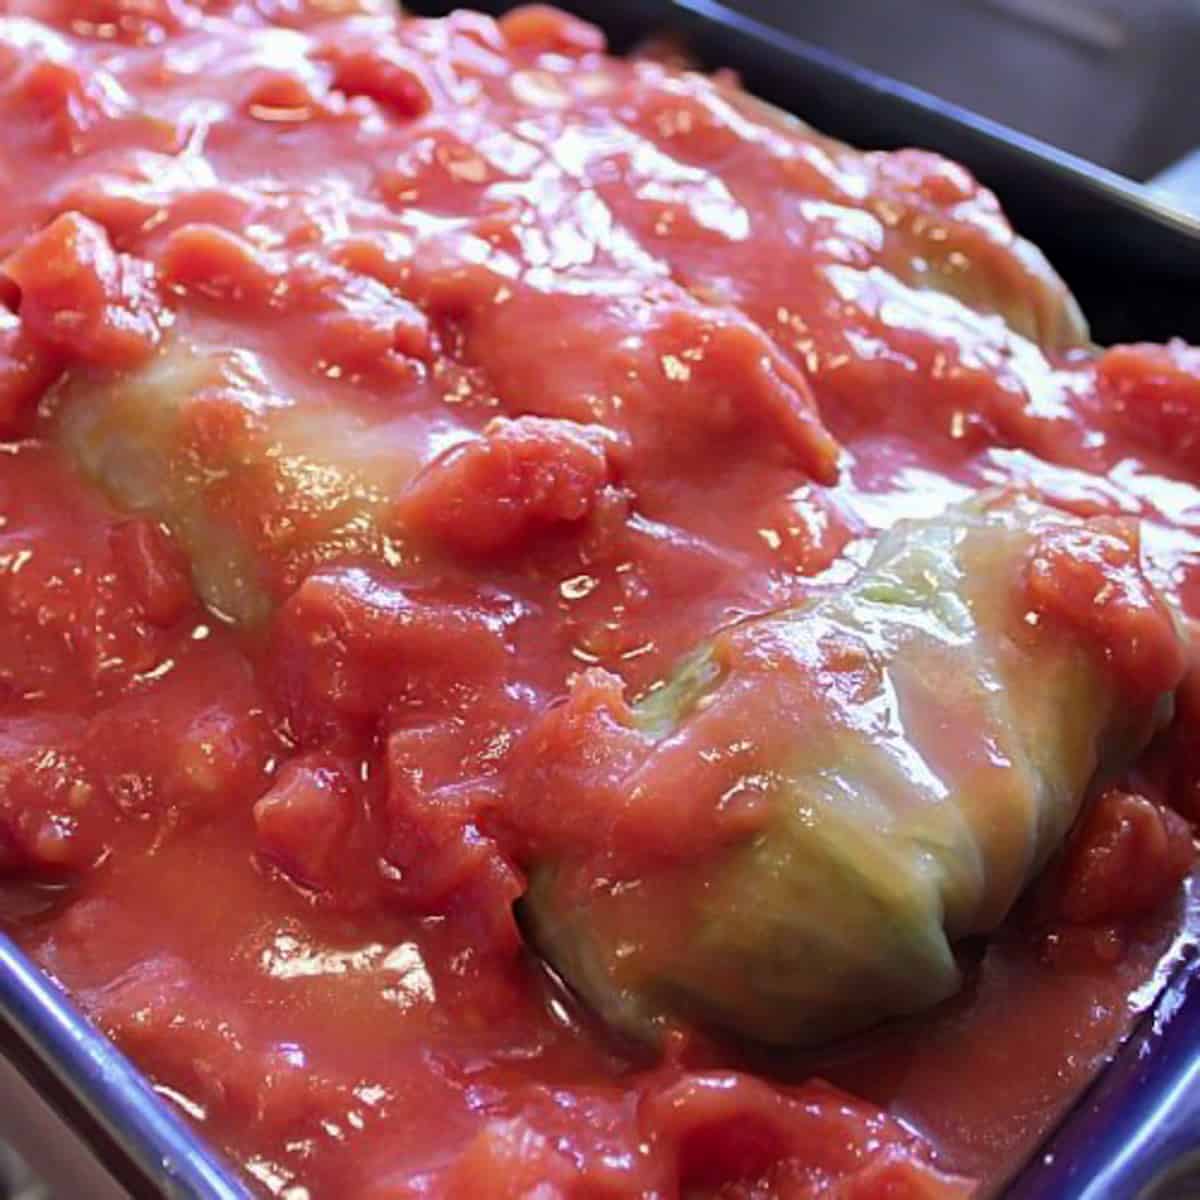 Cabbage rolls in a baking dish with a can of tomatoes poured over them.